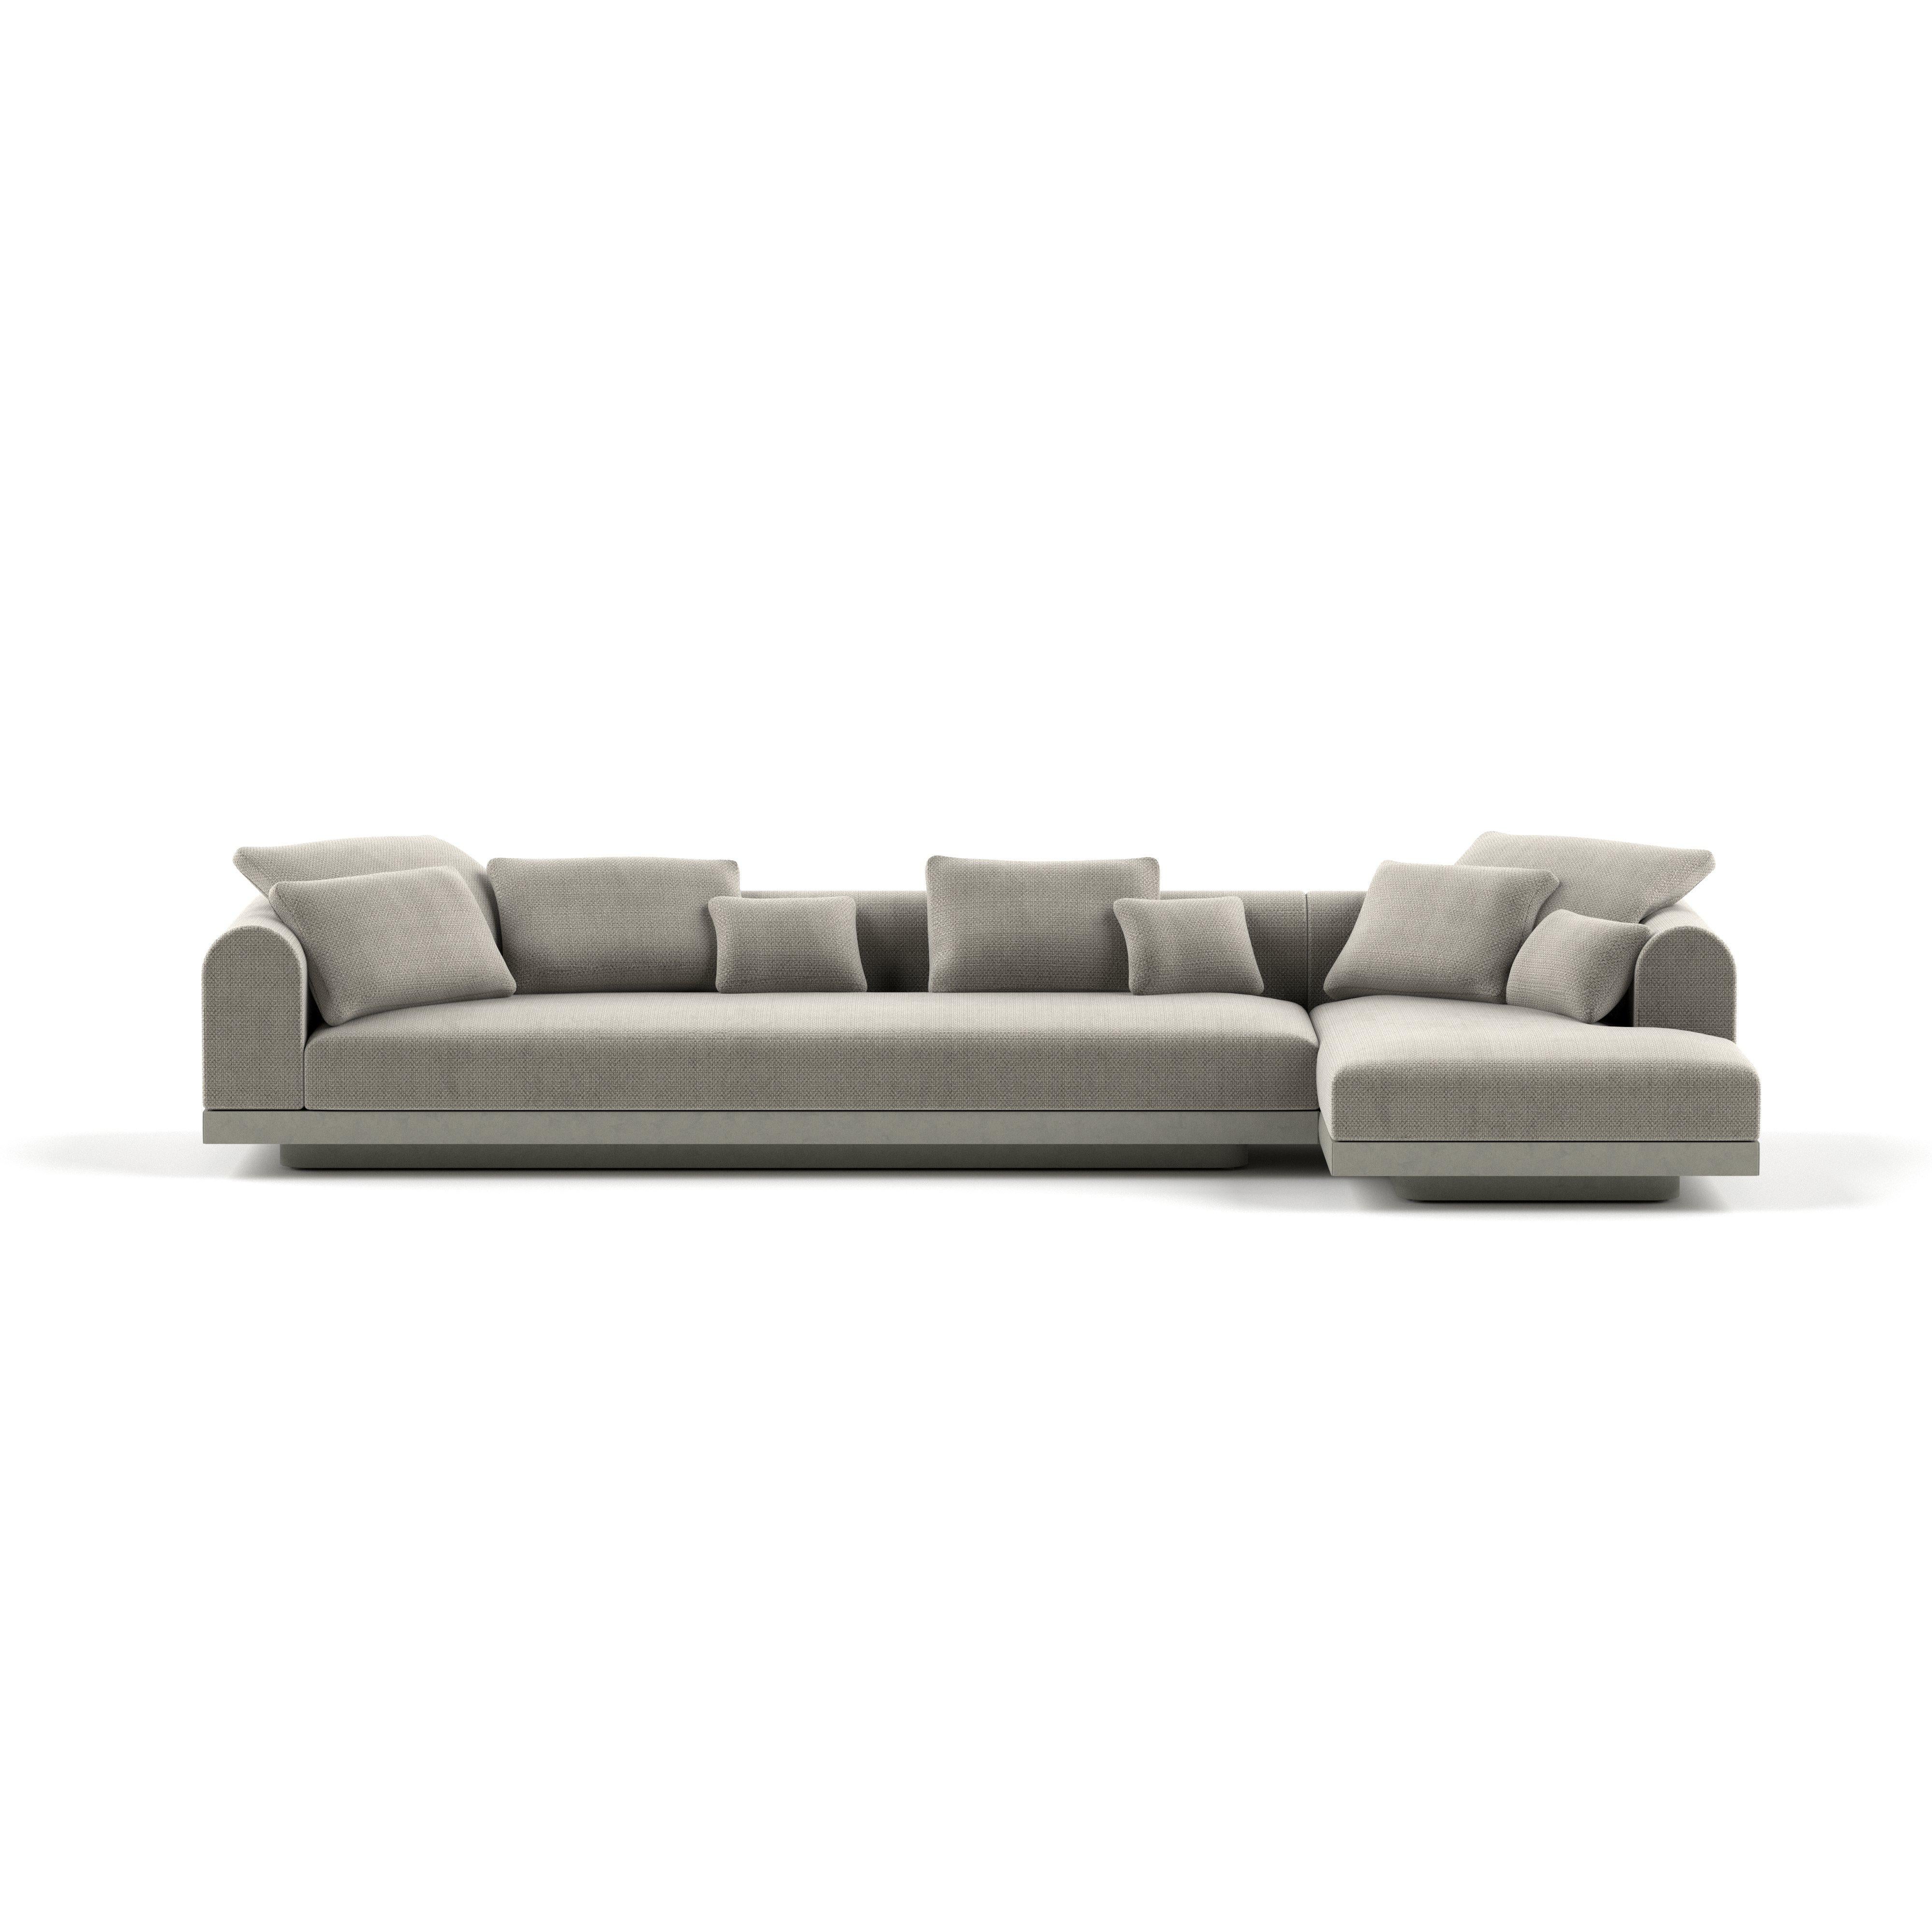 'Aqueduct' Contemporary Sofa by Poiat, Setup 2, Yang 95, High Plinth For Sale 4